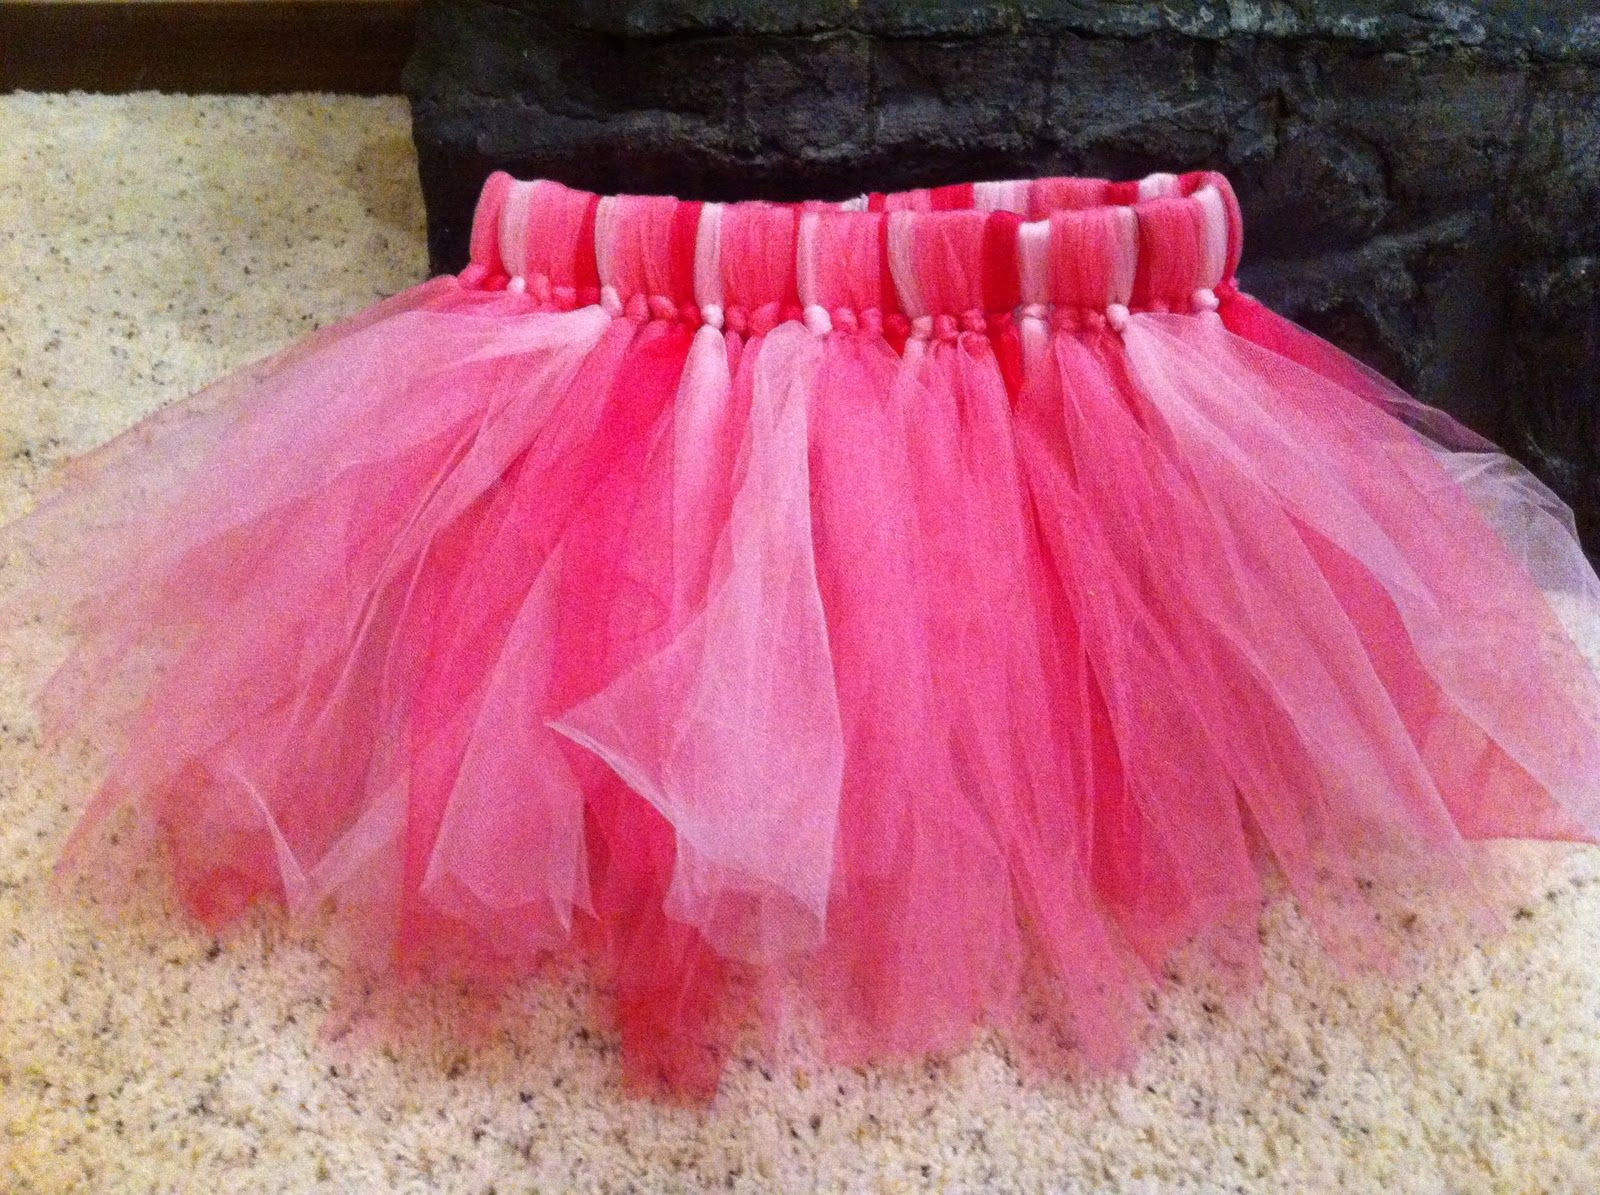 DIY Tutu Skirt For Baby
 Pin by Cindy D on Bridal shower ideas